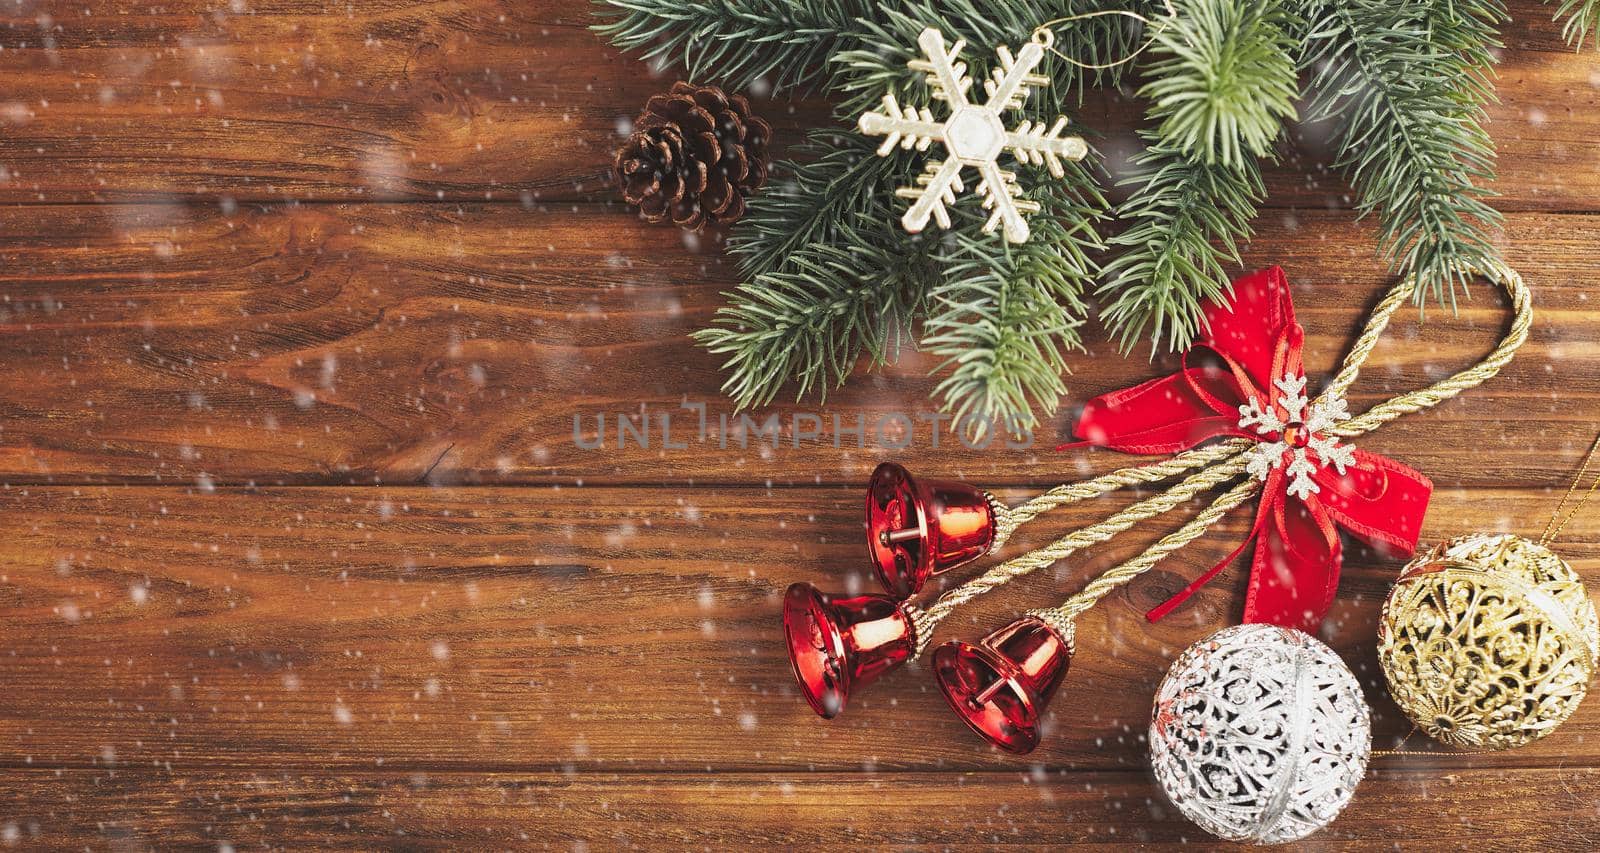 Merry christmas card.  Christmas concept, New Year gifts. Copy space framed by Christmas tree branches, decorations, sweets.